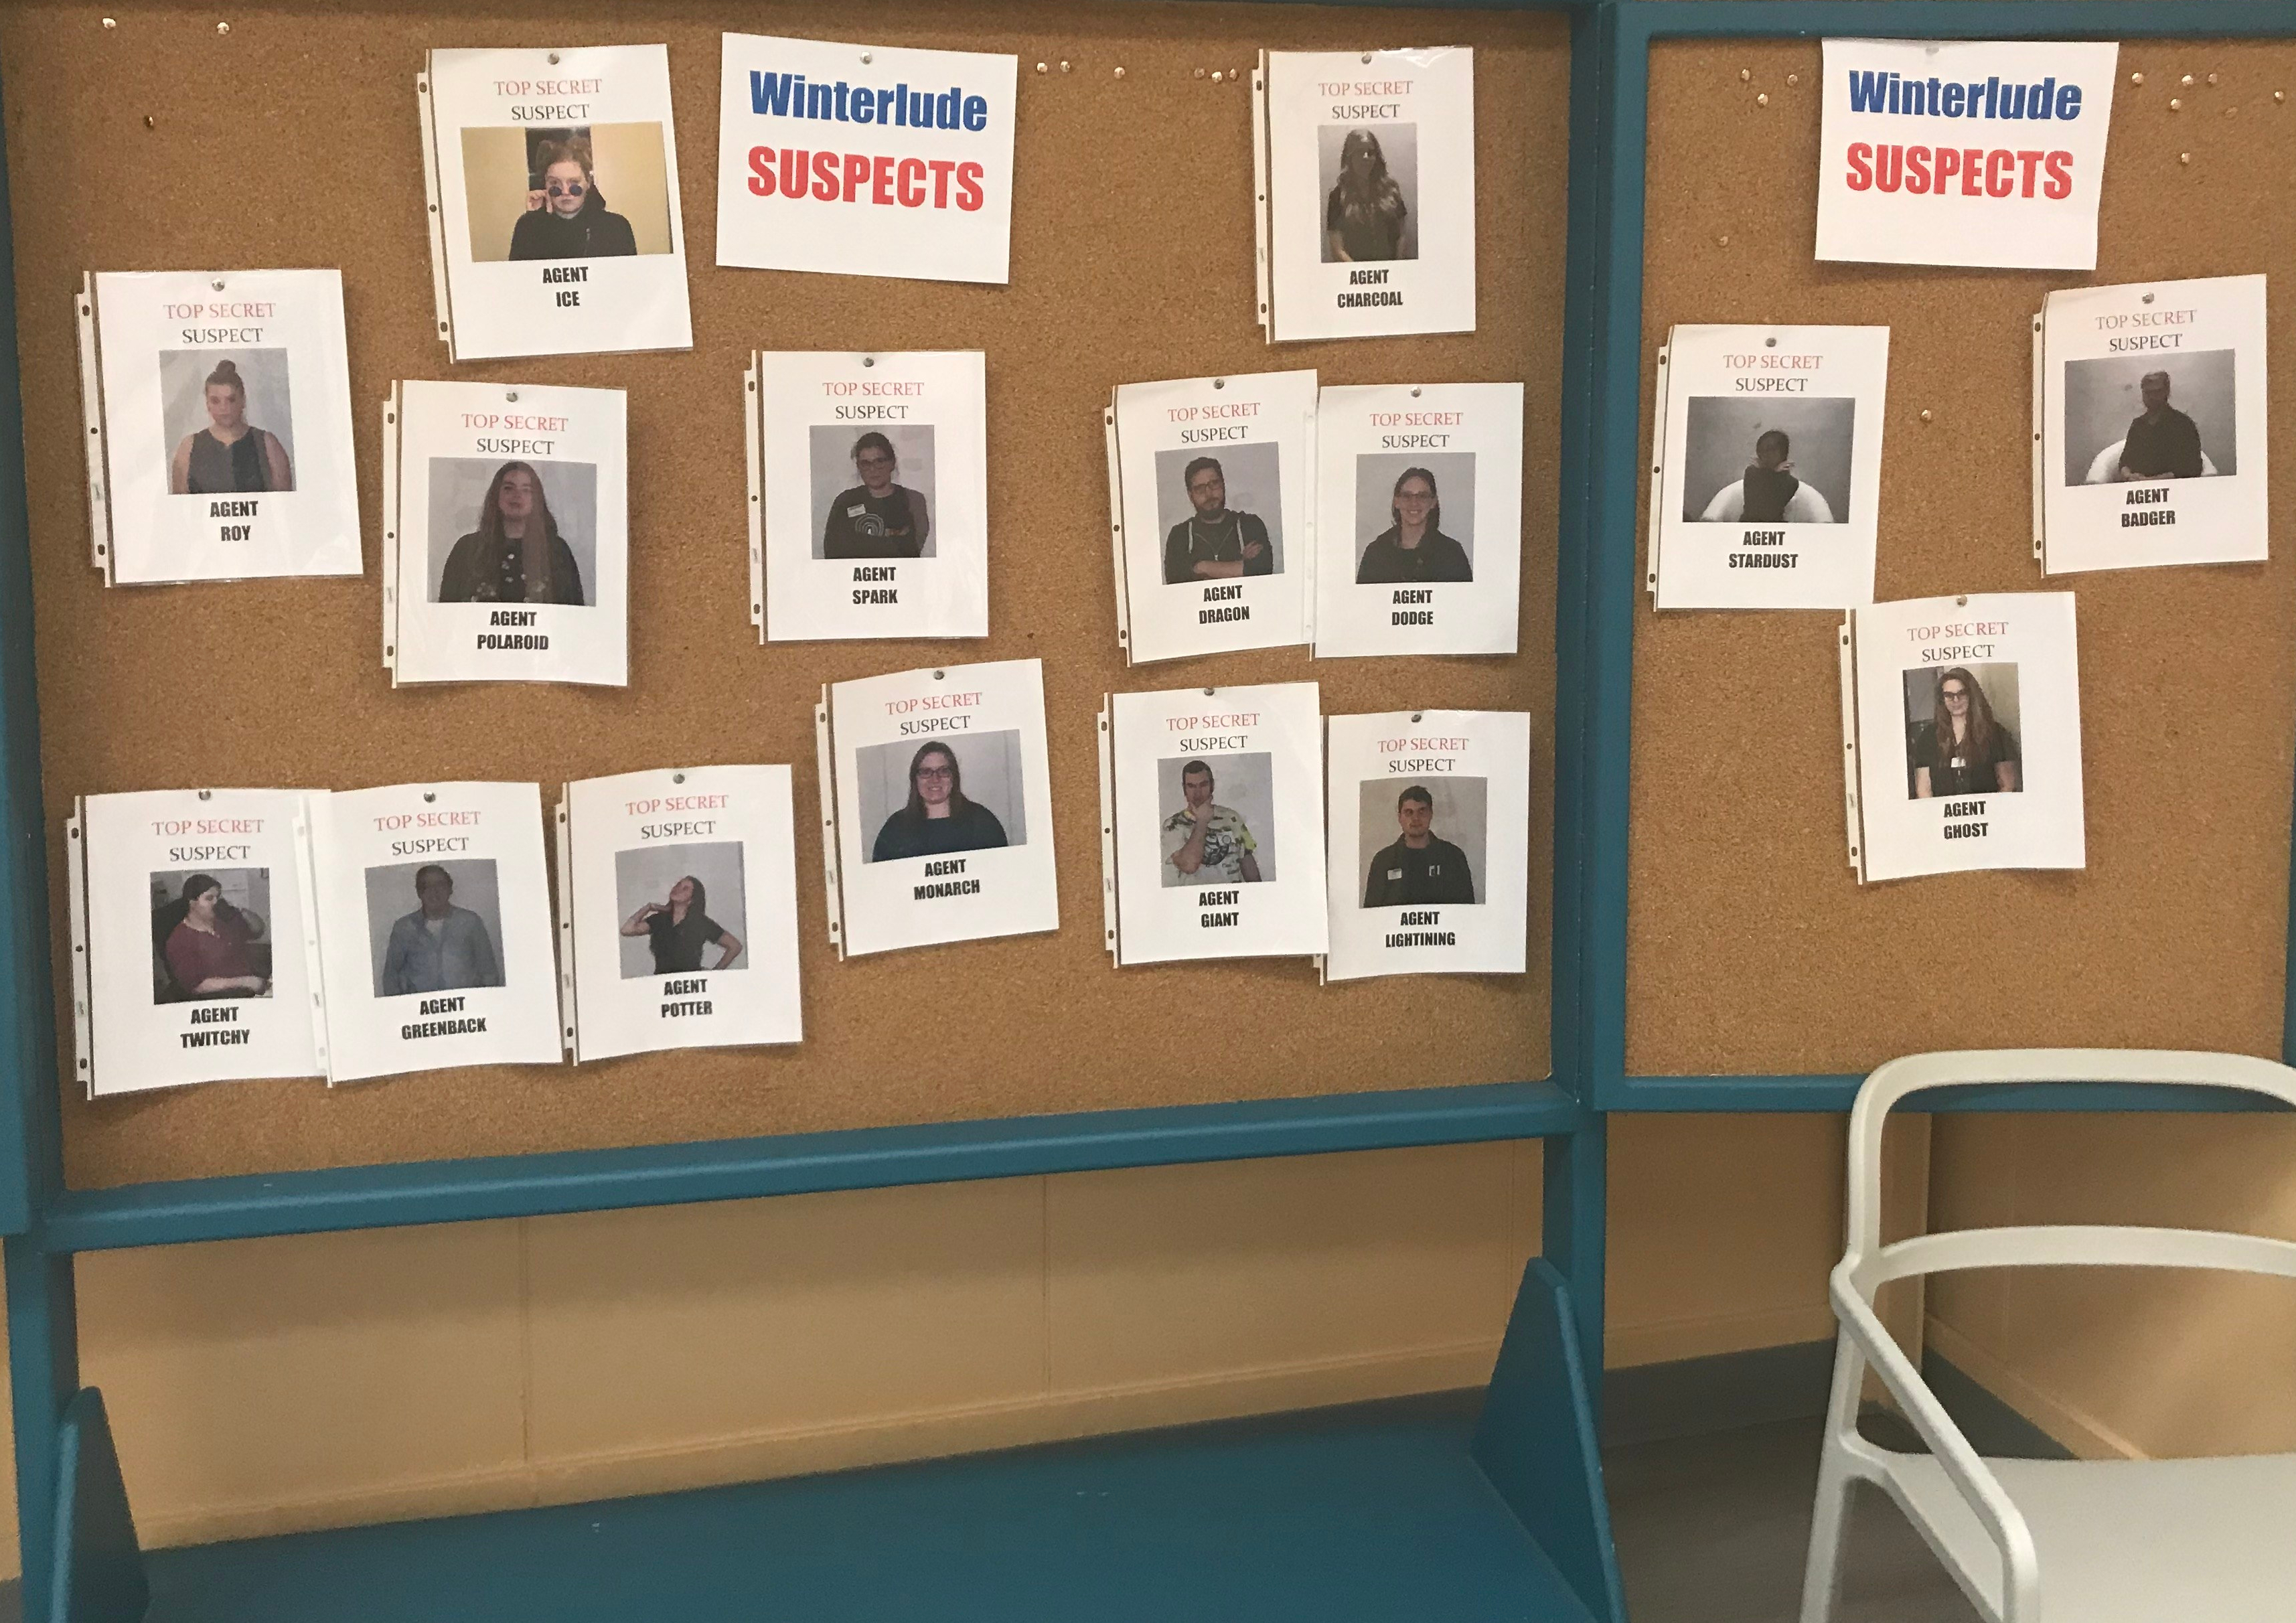 Photos of Winterlude suspects for Spy Camp pinned on a bulletin board.